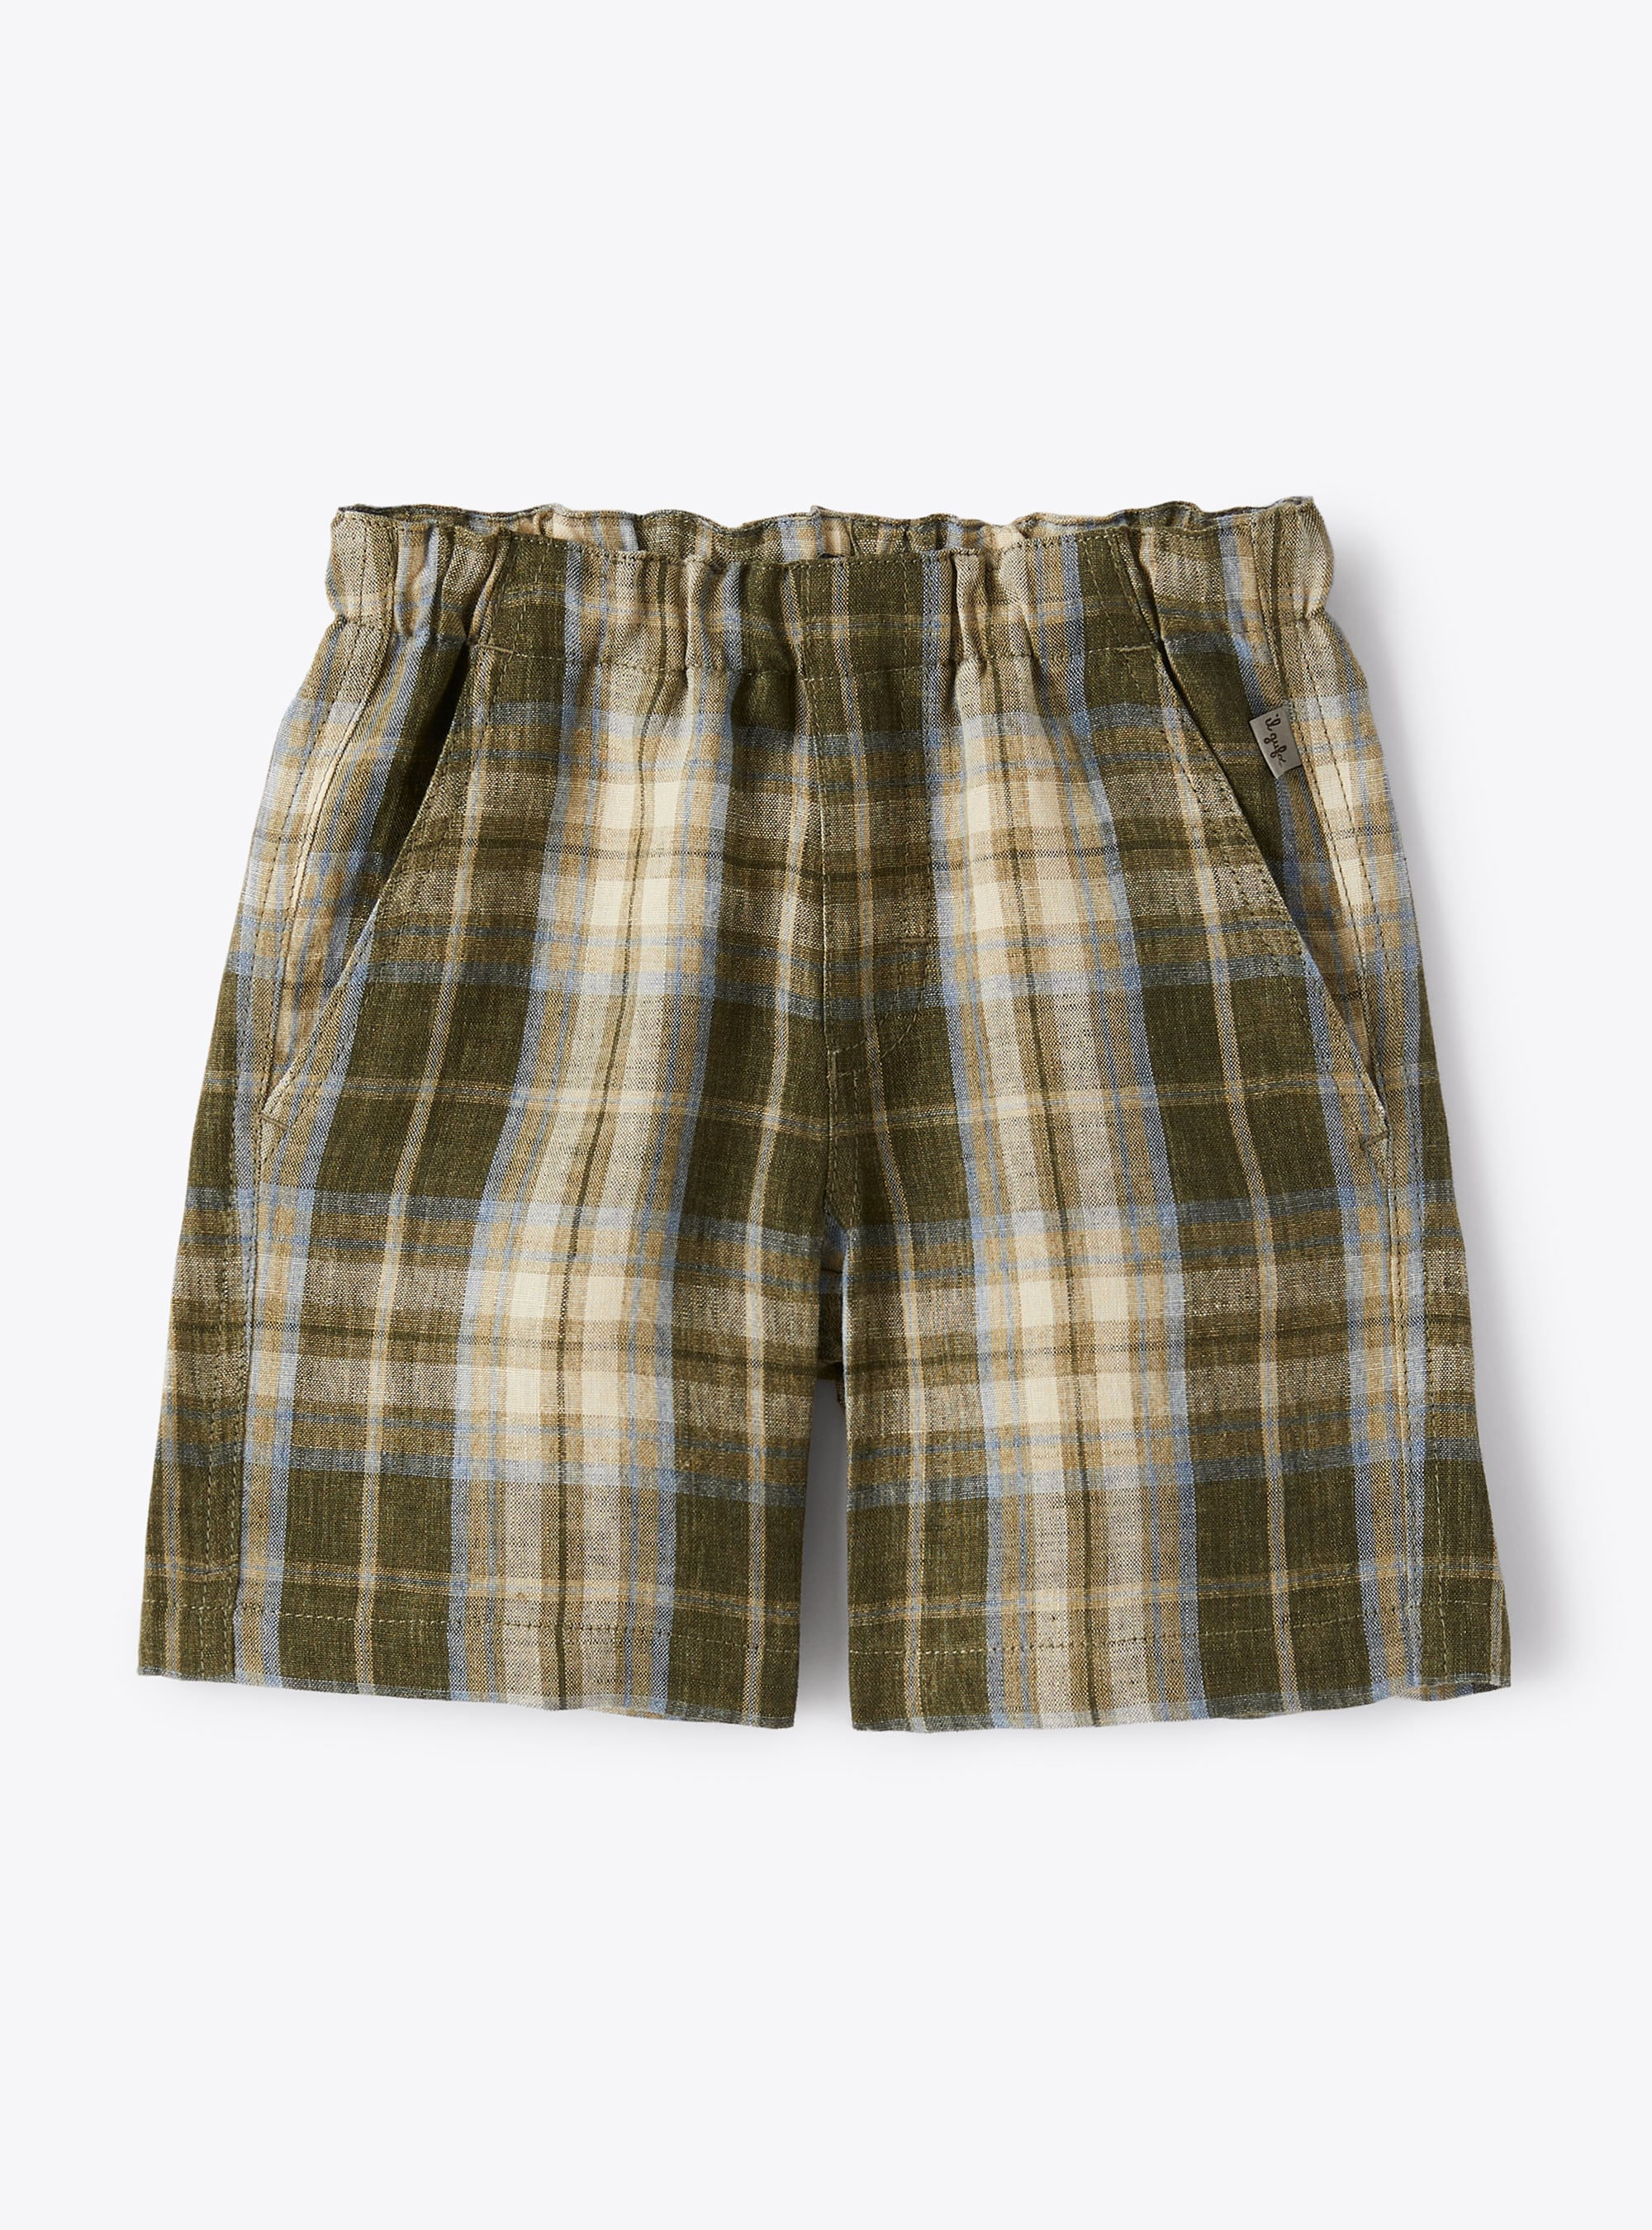 Bermuda shorts in madras-patterned linen - Trousers - Il Gufo